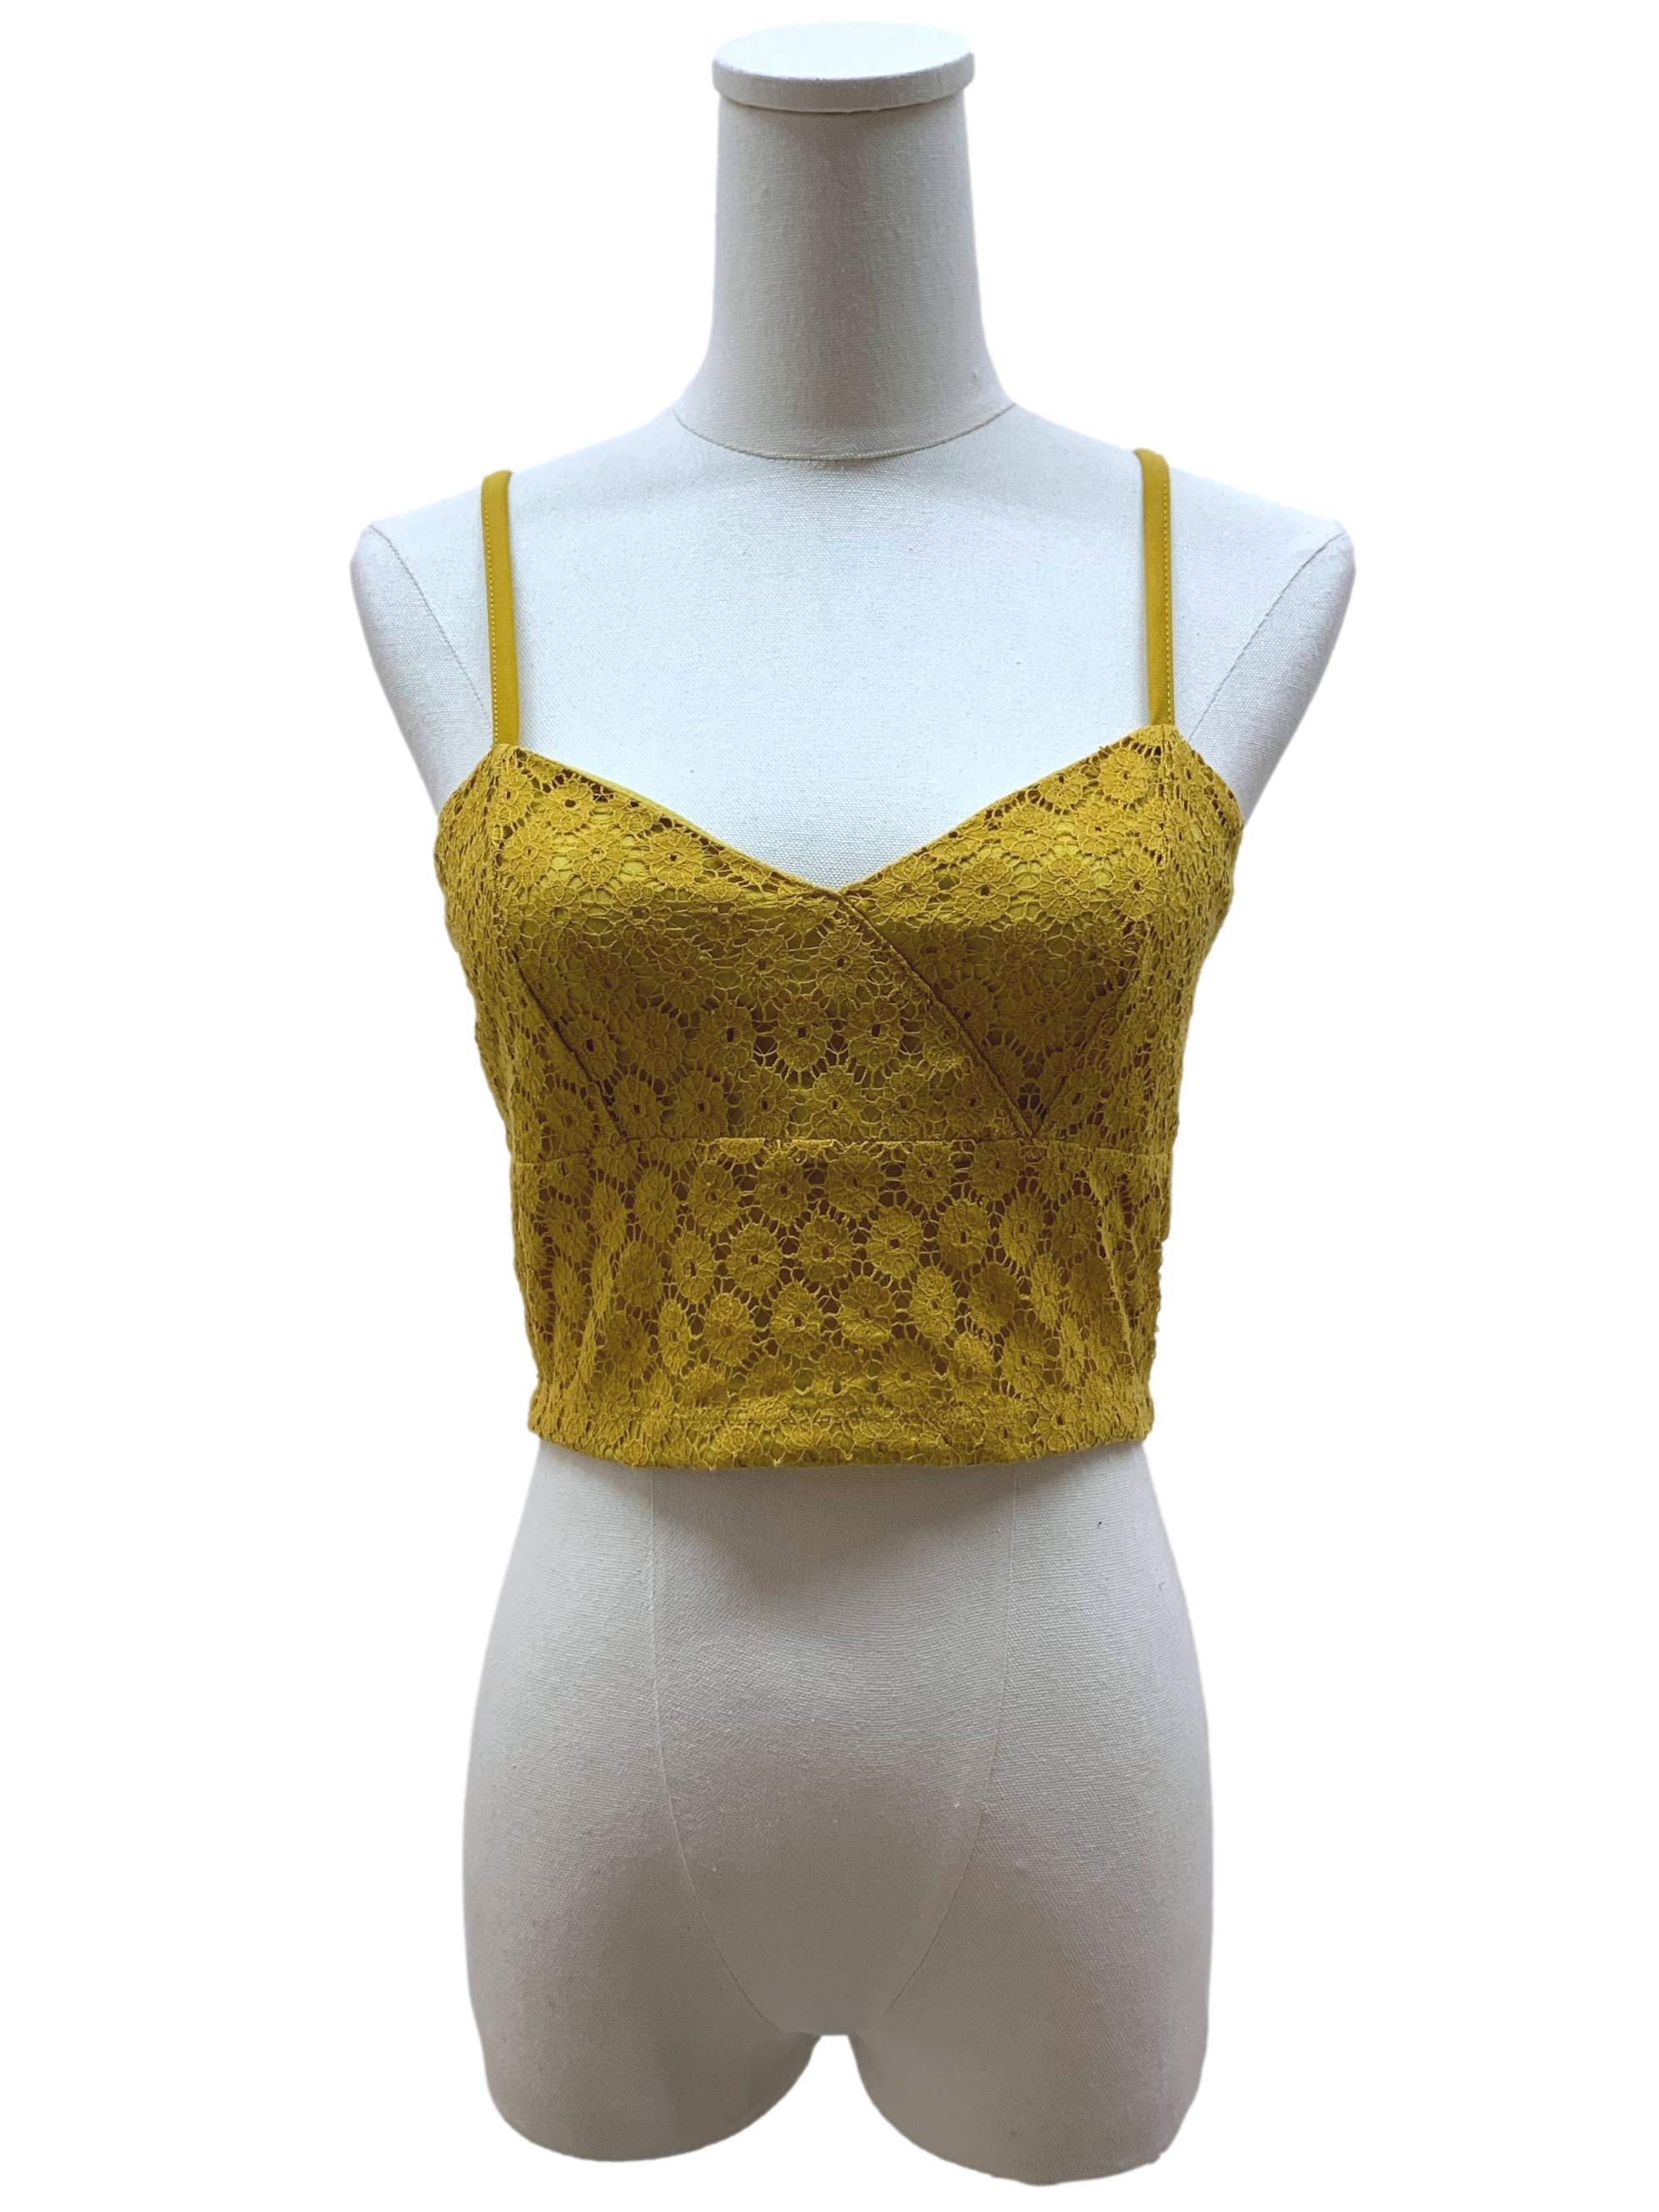 Mustard Yellow Floral Lace Top